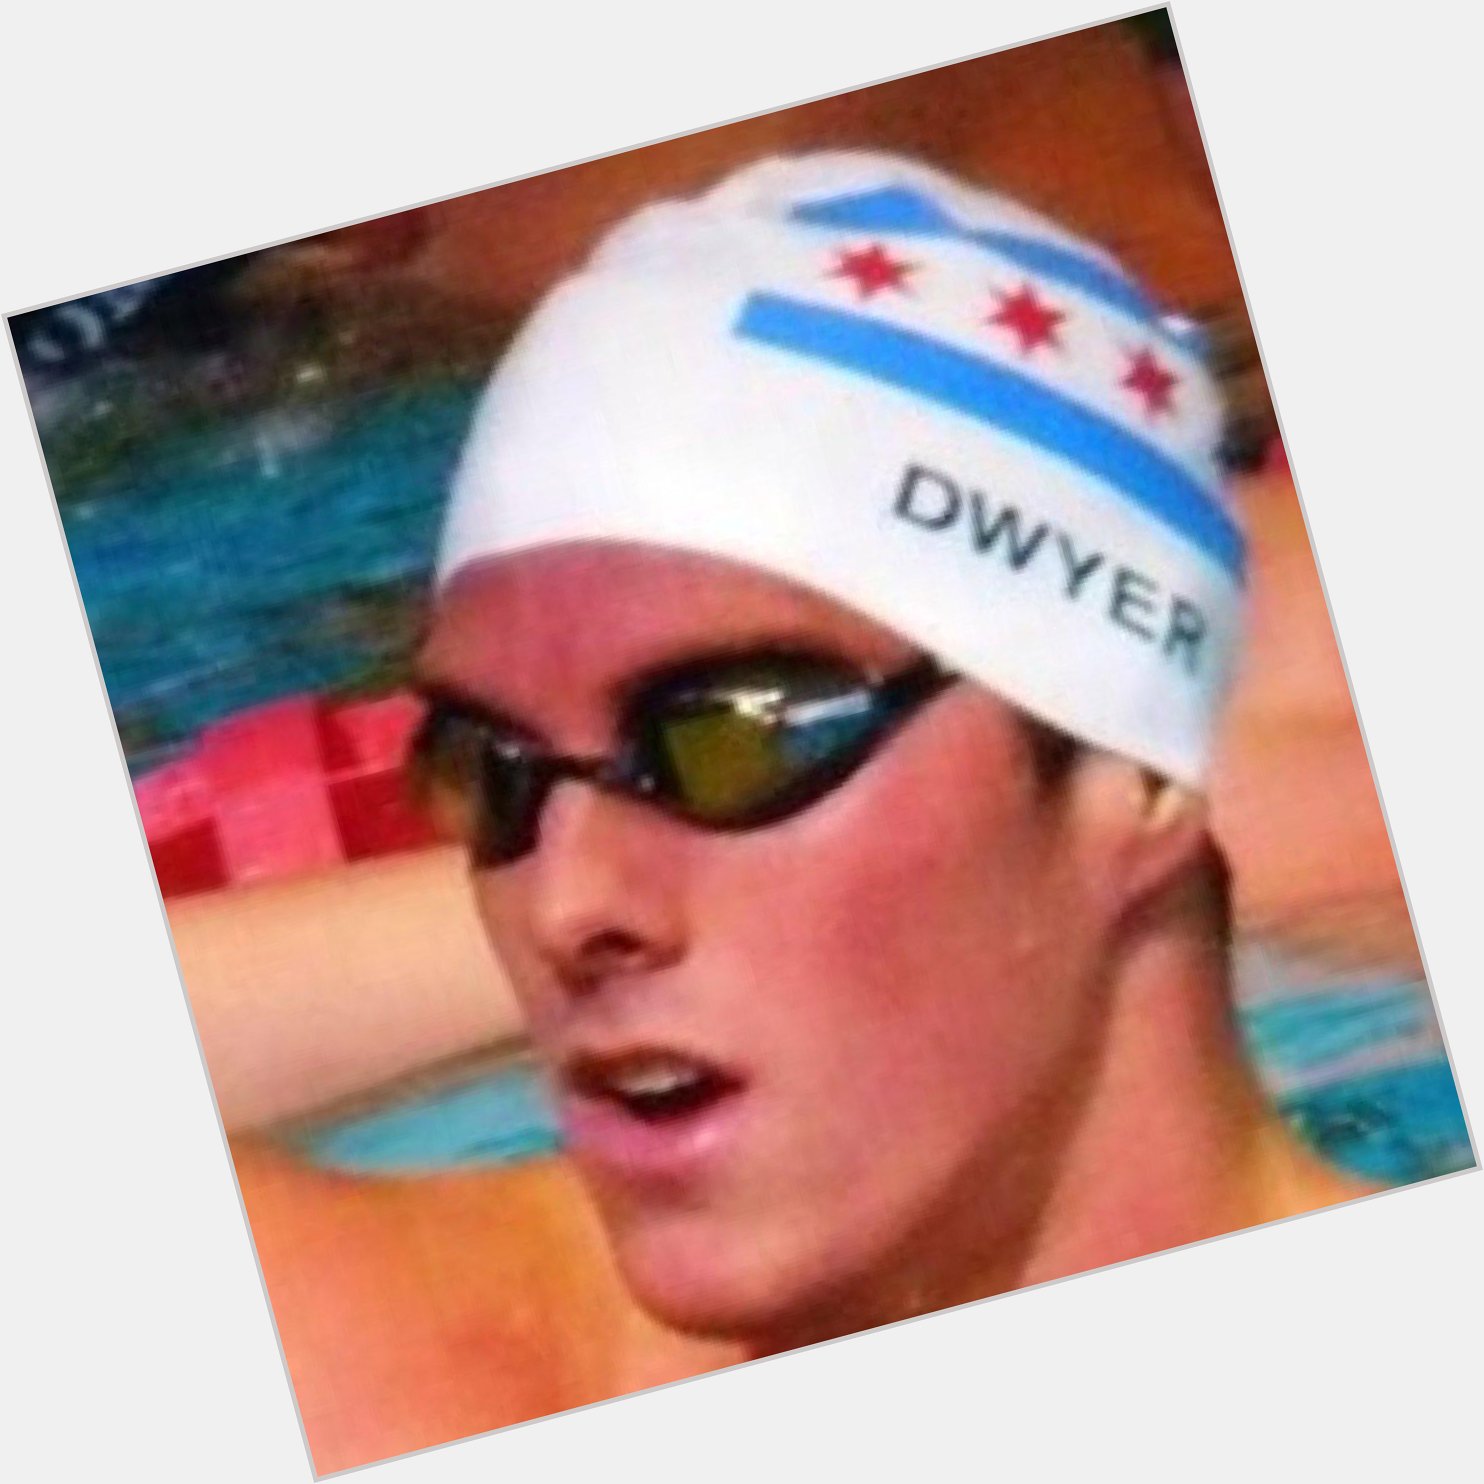 Happy 26th birthday to the one and only Conor Dwyer! Congratulations 